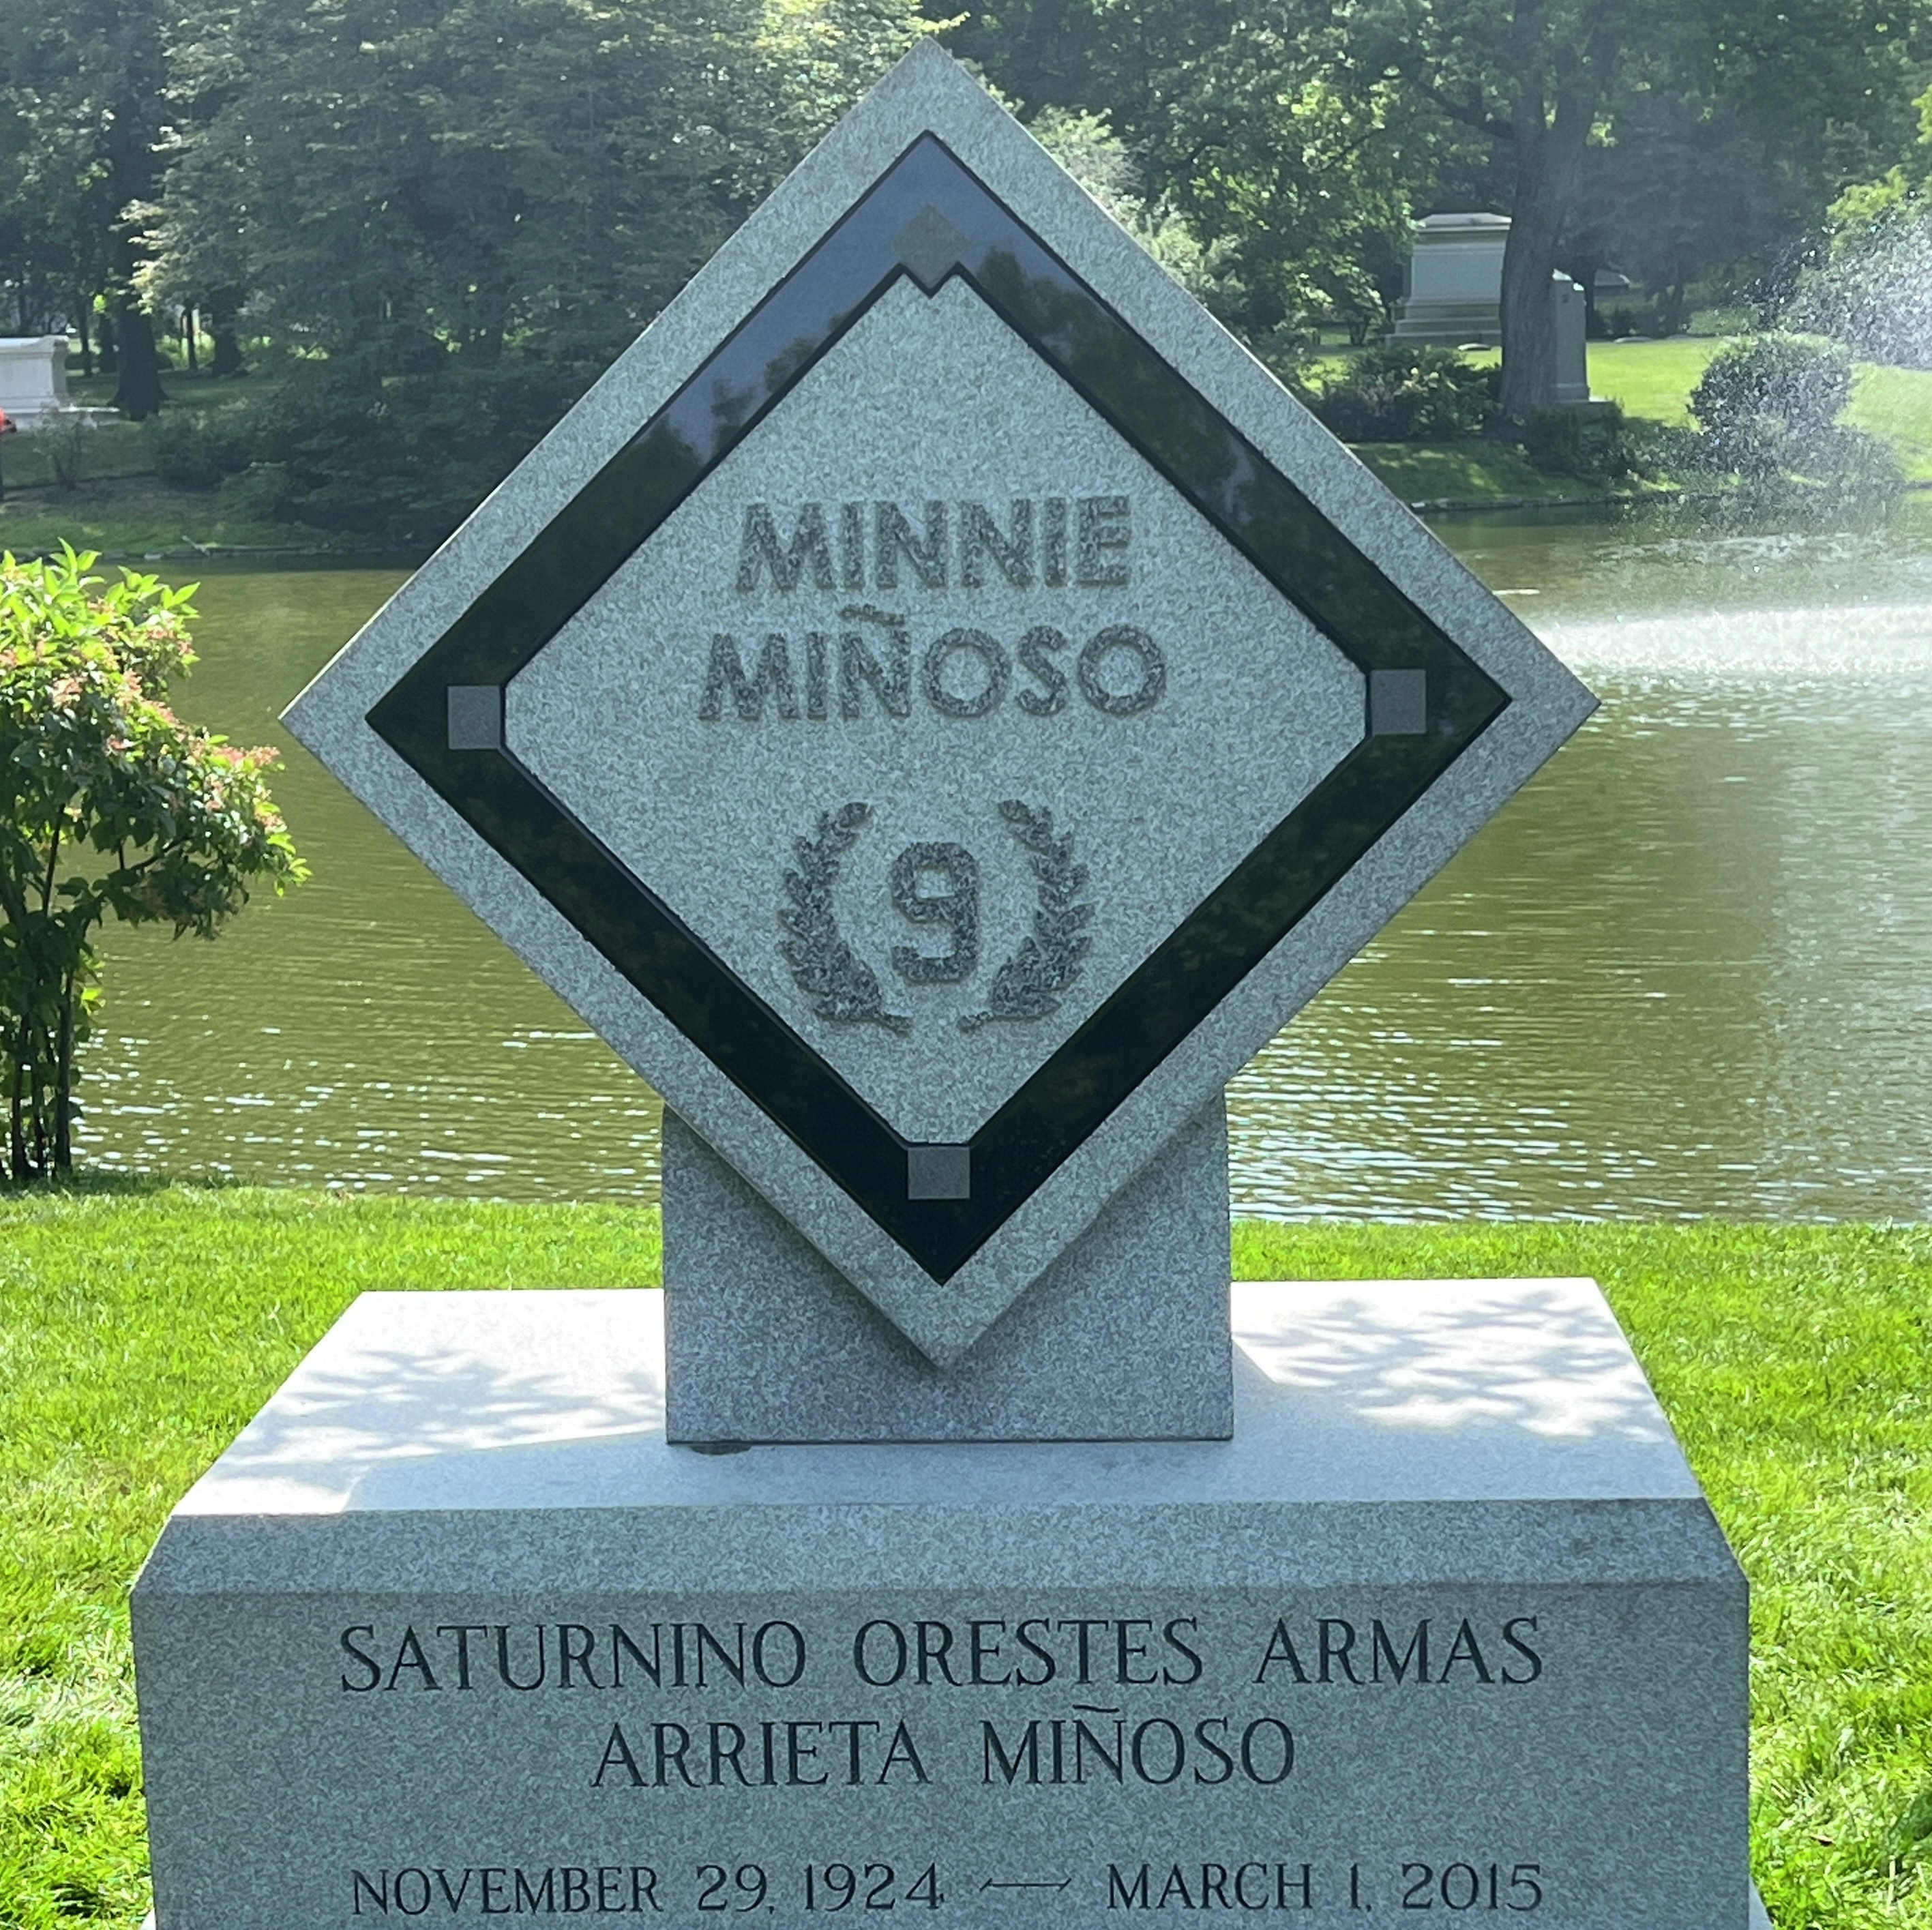 Monument to Minnie Miñoso goes up at Graceland Cemetery